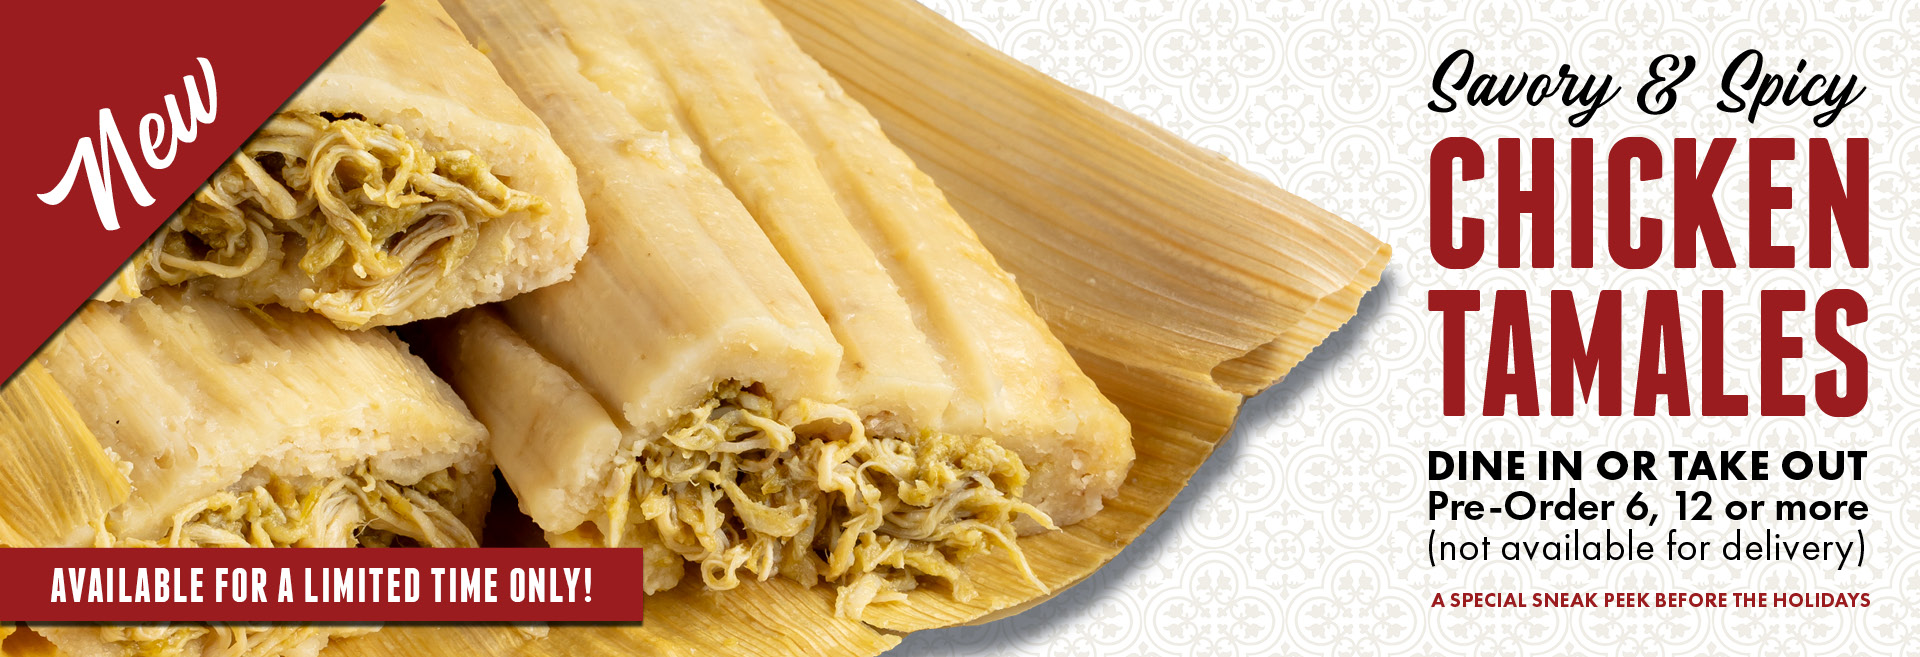 Chicken Tamales for a Limited Time Only at Miguel's Restaurant